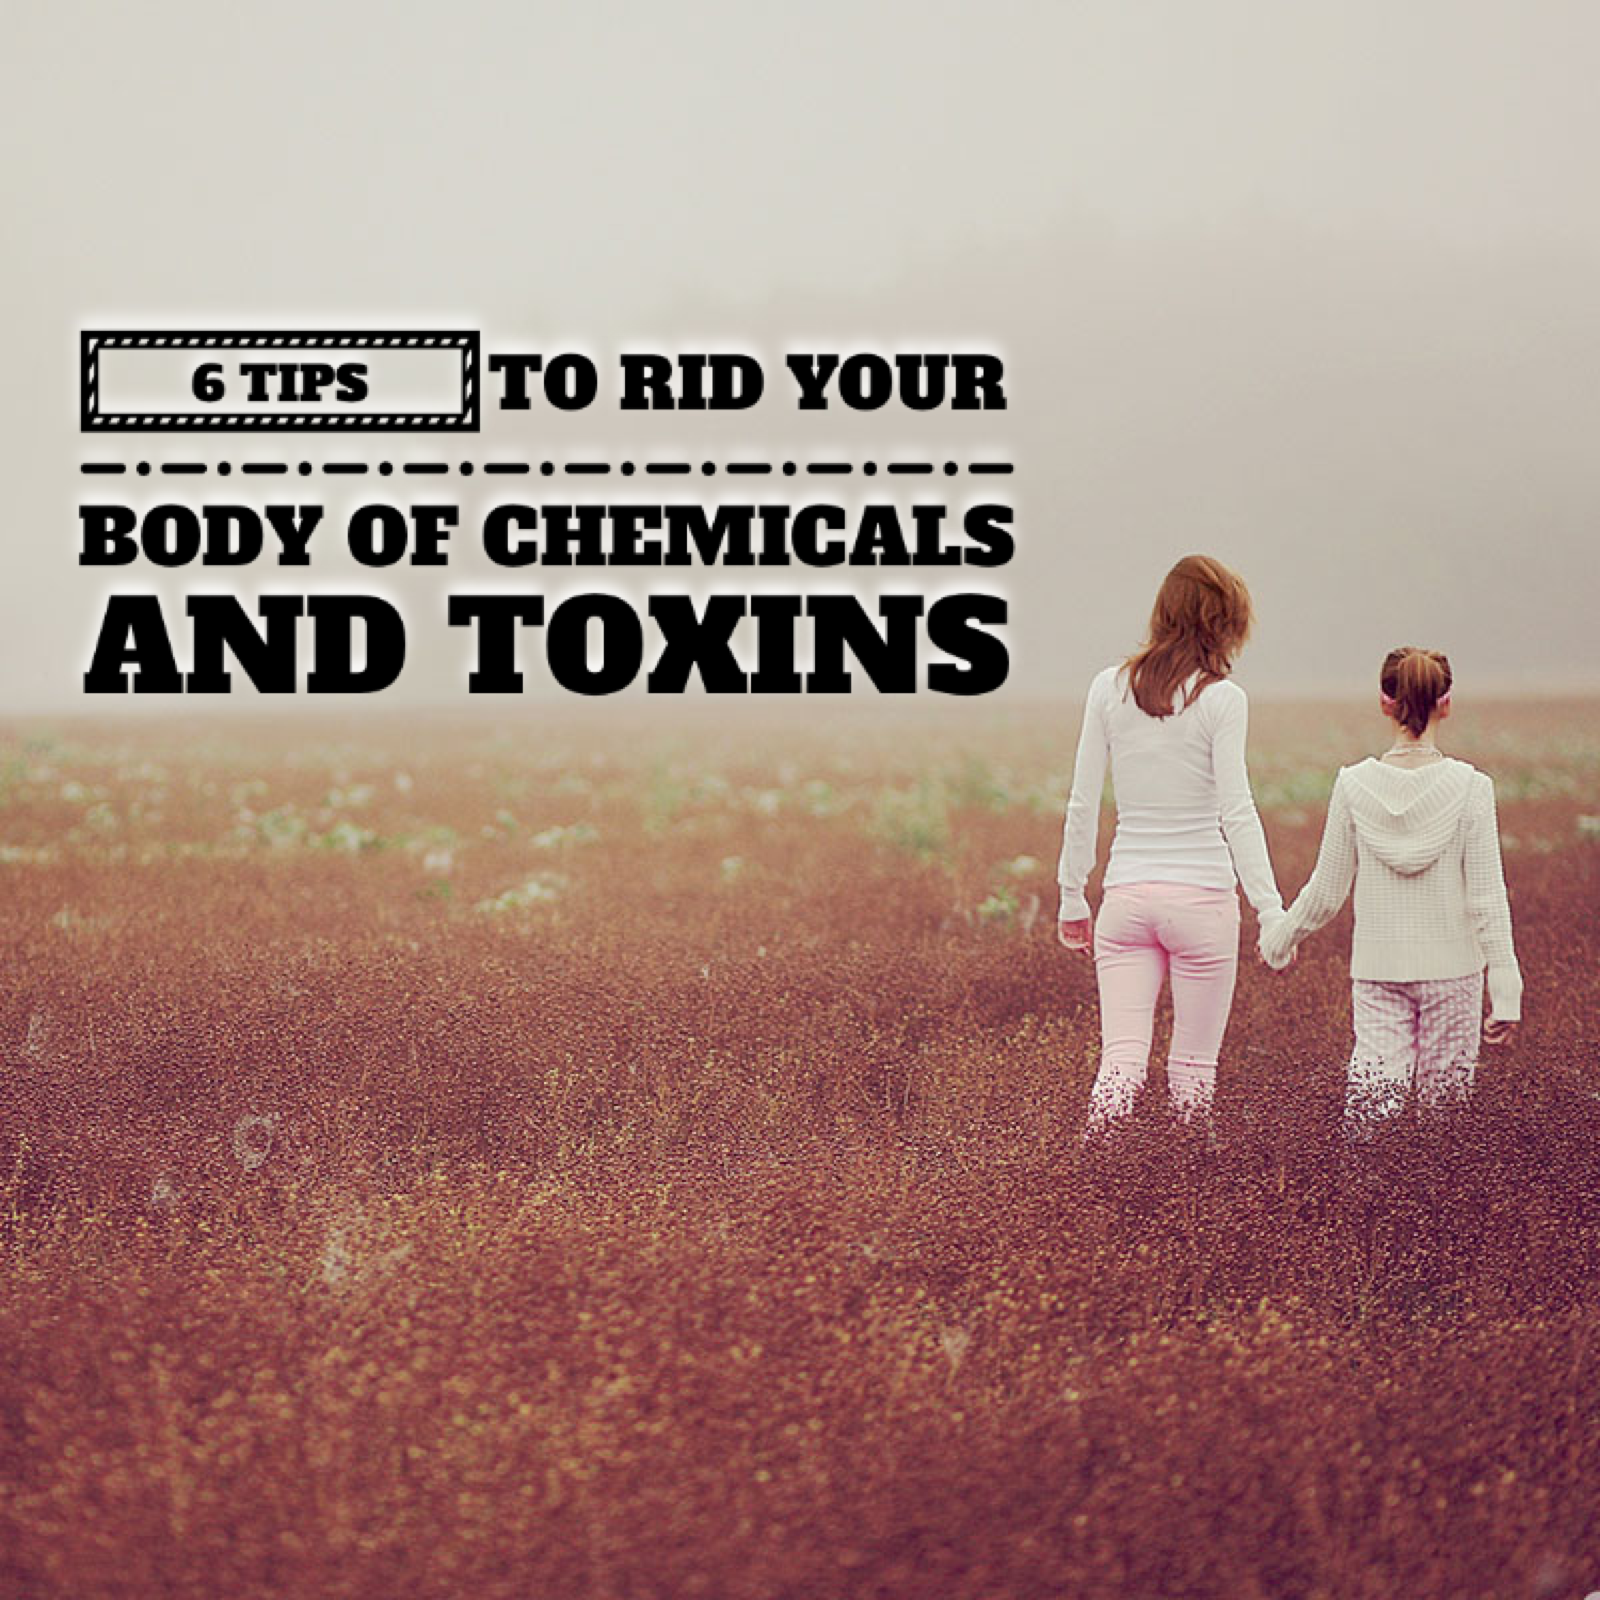 6 Tips to Rid Your Body of Chemicals and Toxins